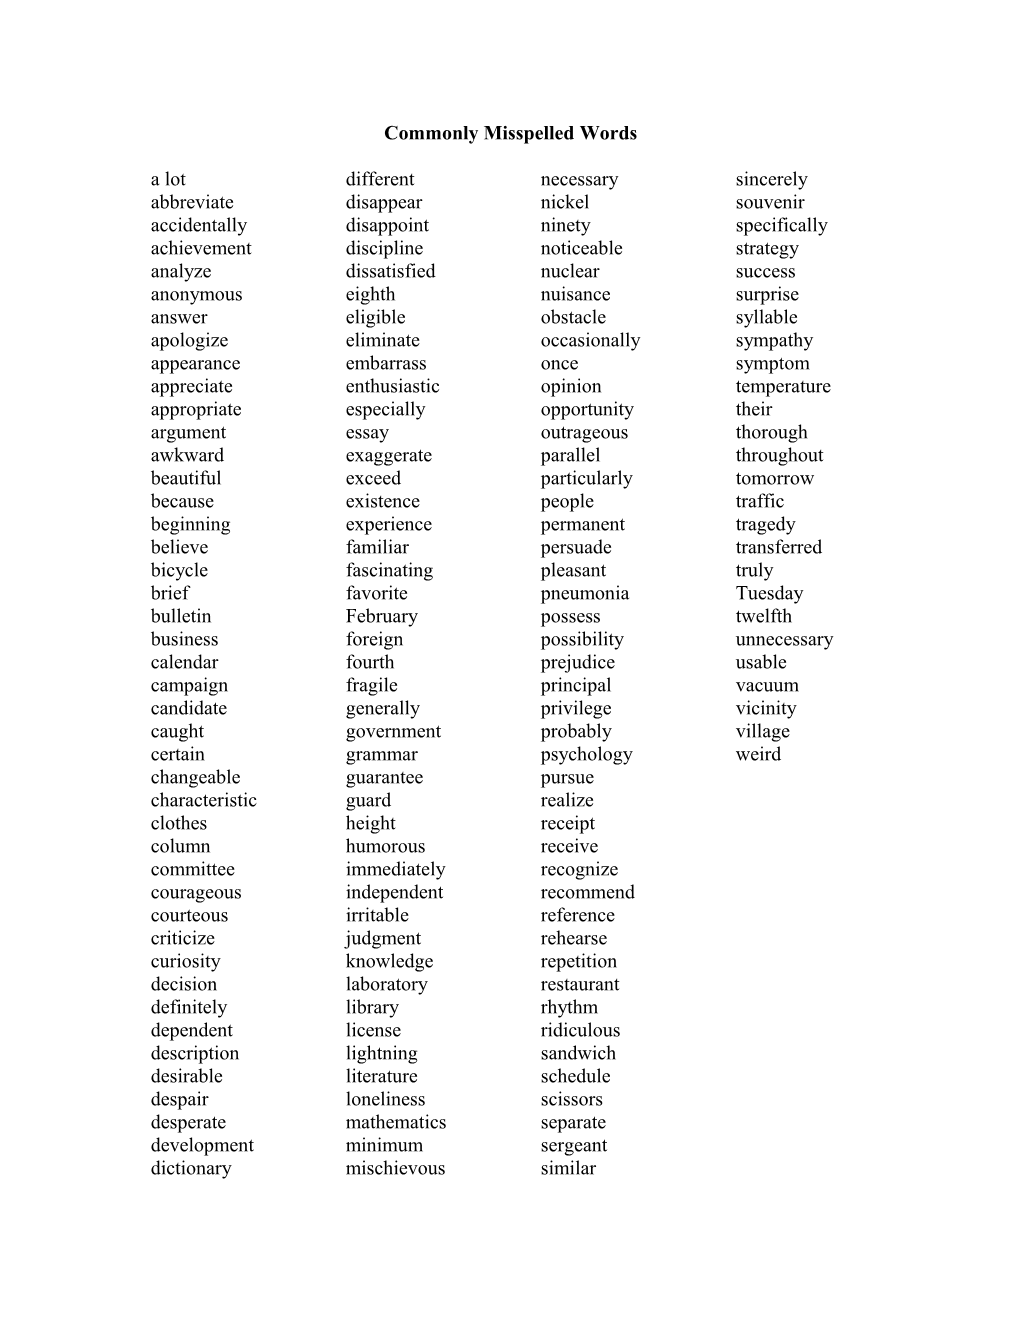 Commonly Misspelled Words List